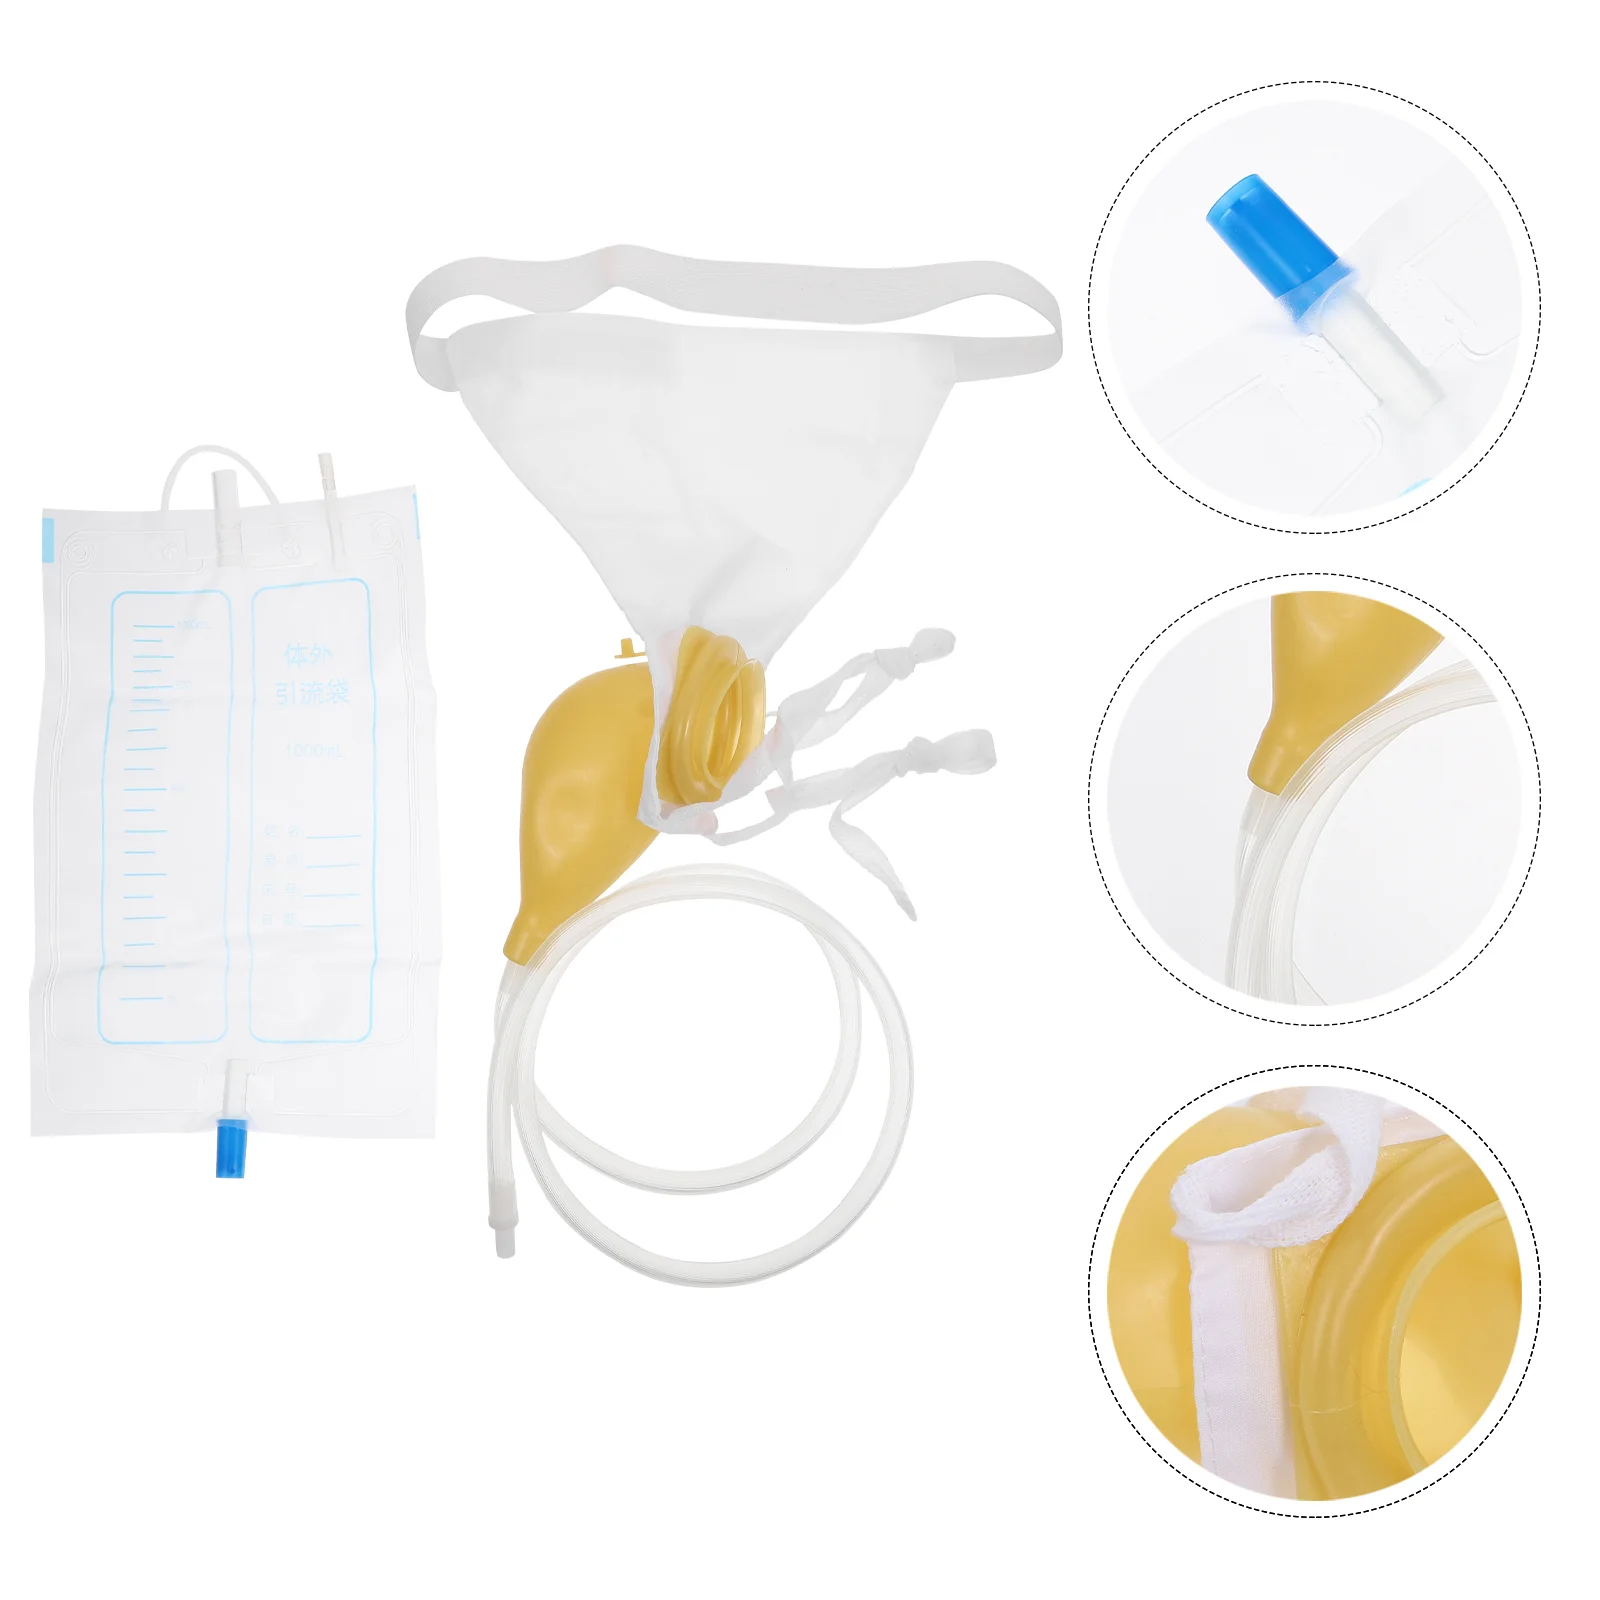 

Bags Bag Urinal Urine Drainage Urinary Pee Disposable Emergency Leg Bottle Container Toilet Chamber Camping Packet Patient